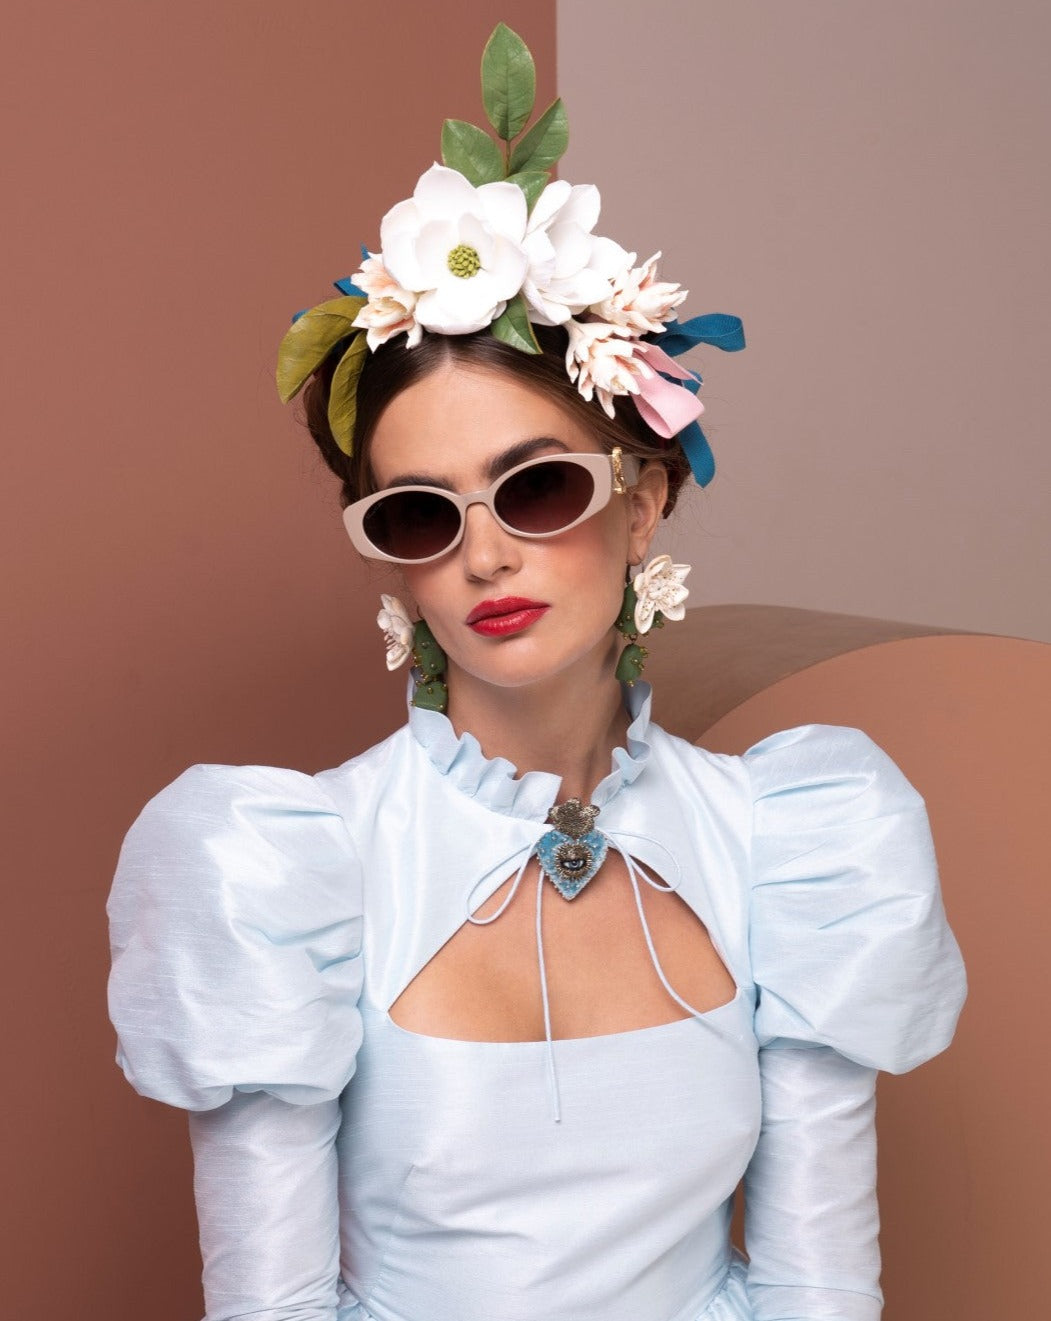 A woman wearing a light blue dress with puffed sleeves, white Frida Portrait by For Art&#39;s Sake® sunglasses with ultra-lightweight nylon lenses, and flower earrings poses confidently. She has a floral headpiece adorned with various flowers and leaves atop her dark hair. The background features earthy tones, enhancing her radiant look.